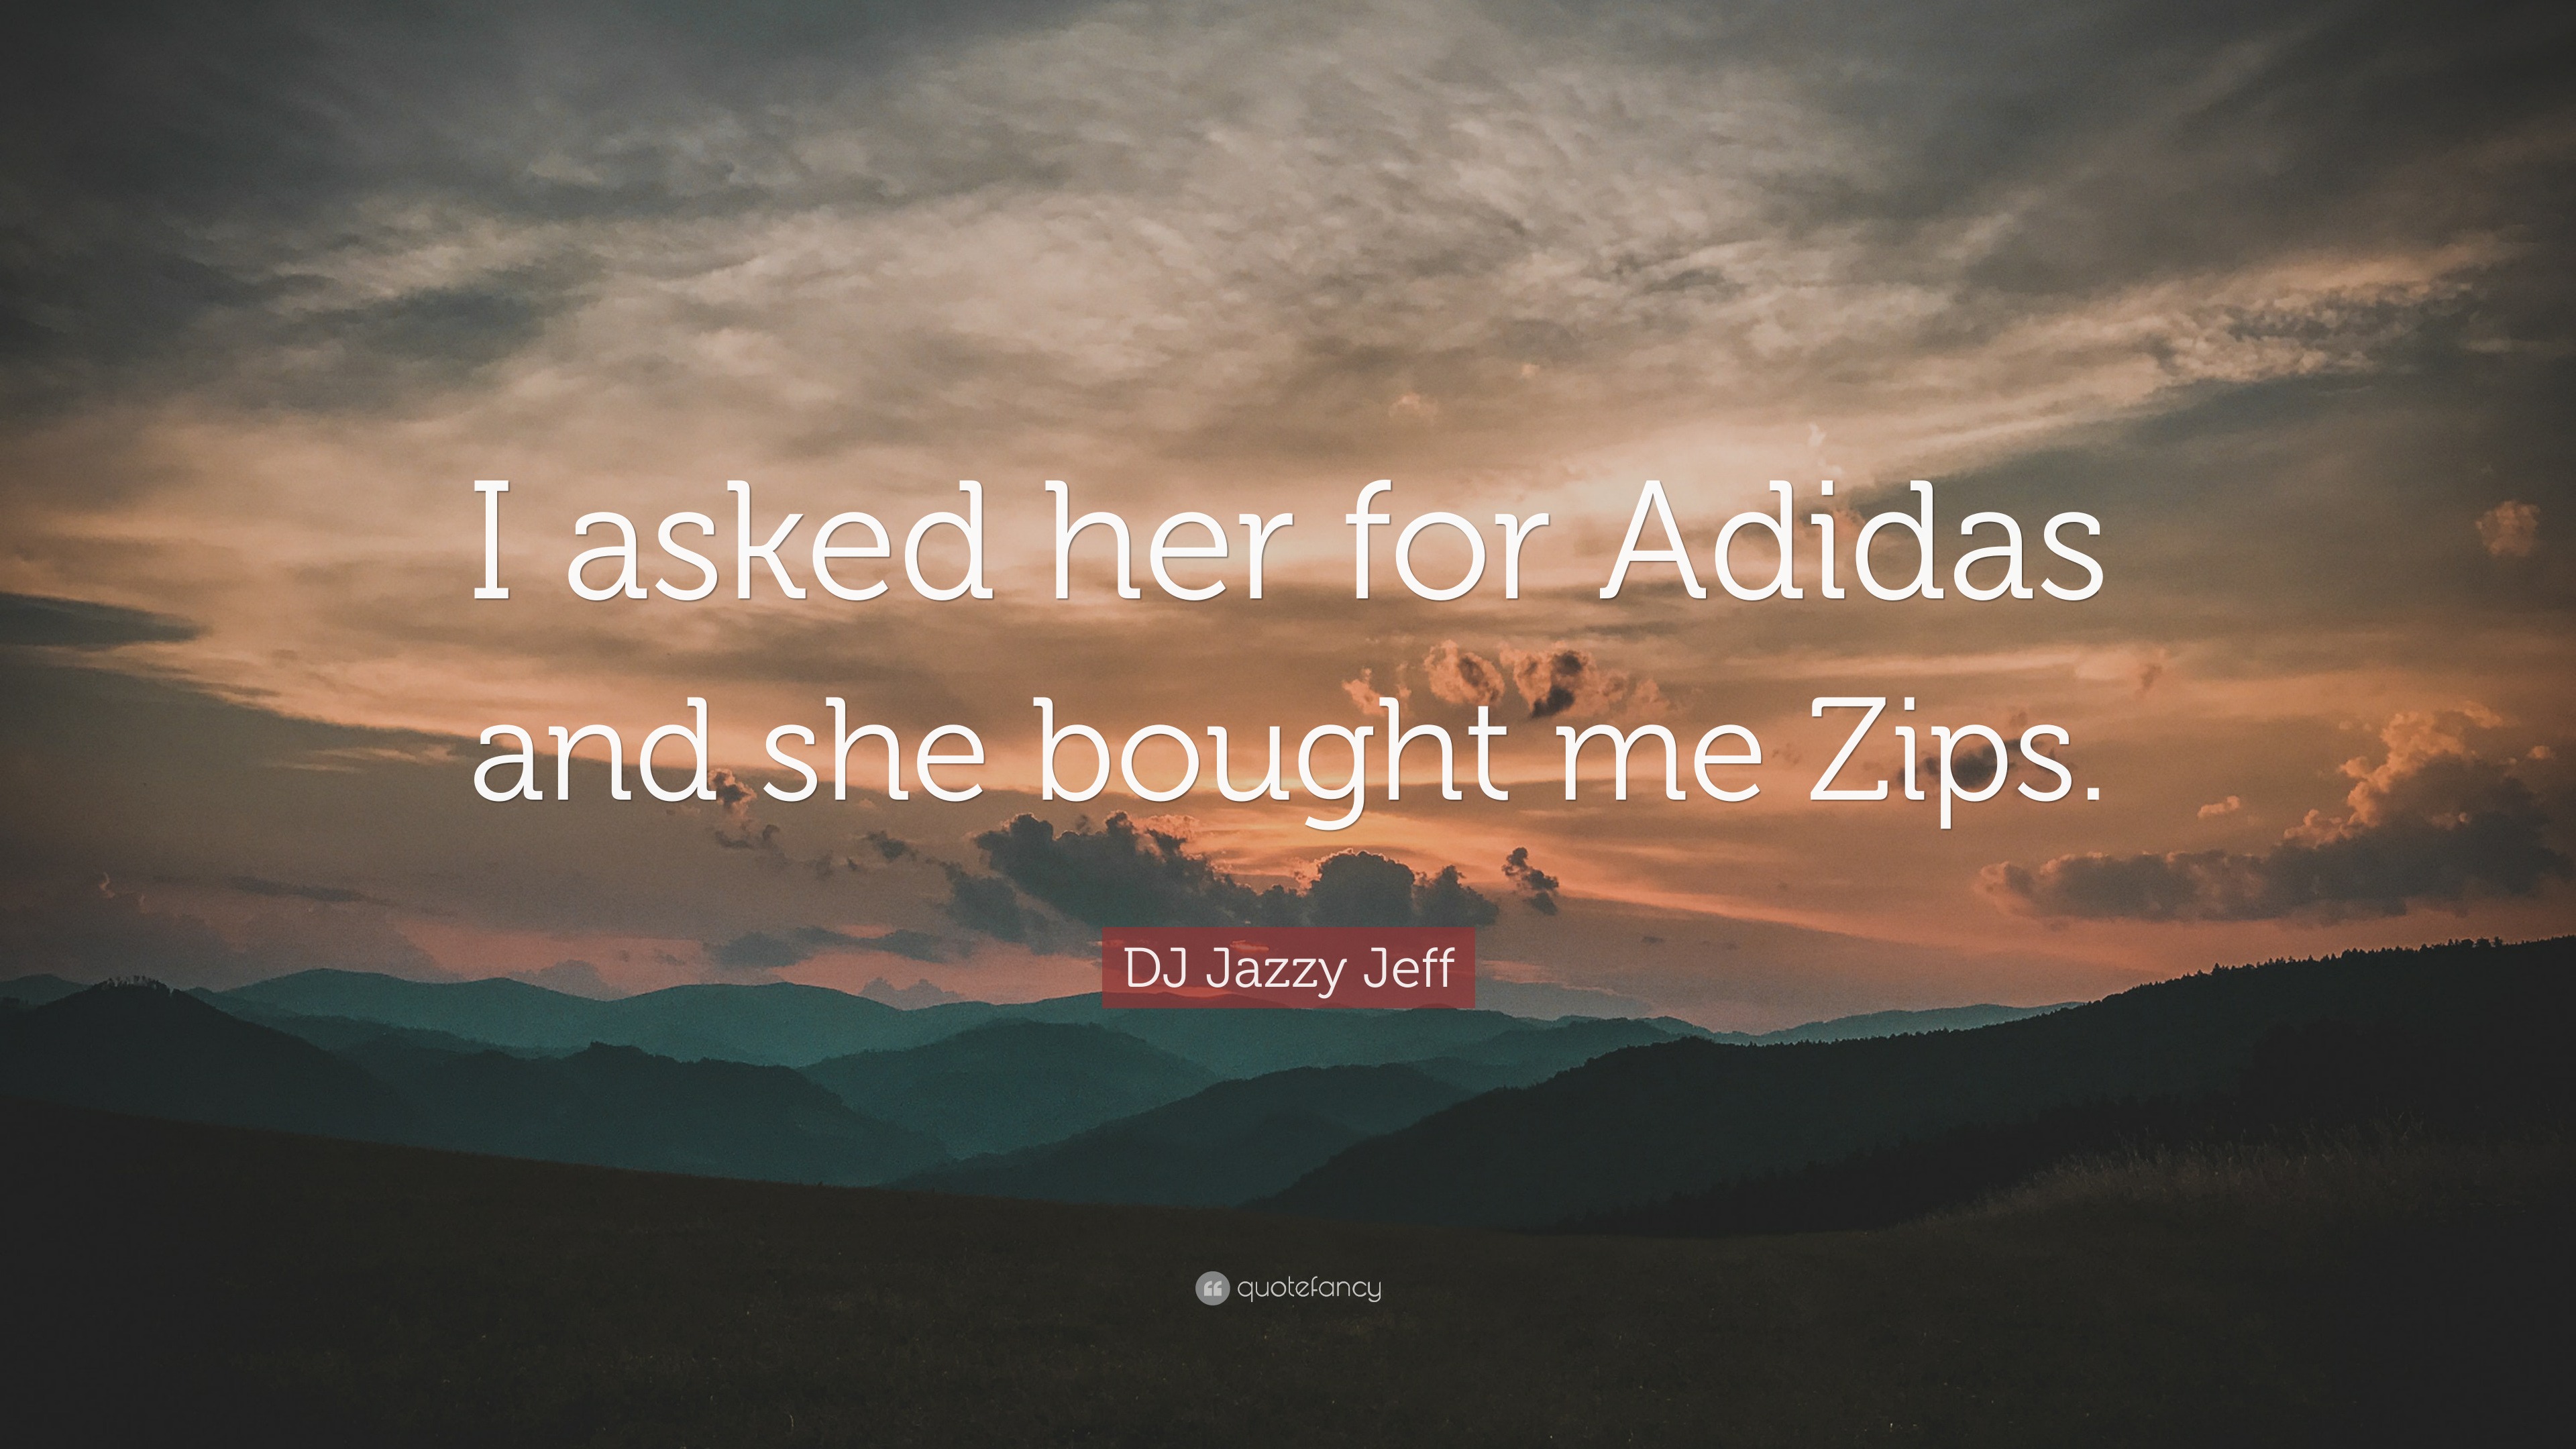 Vivienda Infectar Más grande DJ Jazzy Jeff Quote: “I asked her for Adidas and she bought me Zips.”